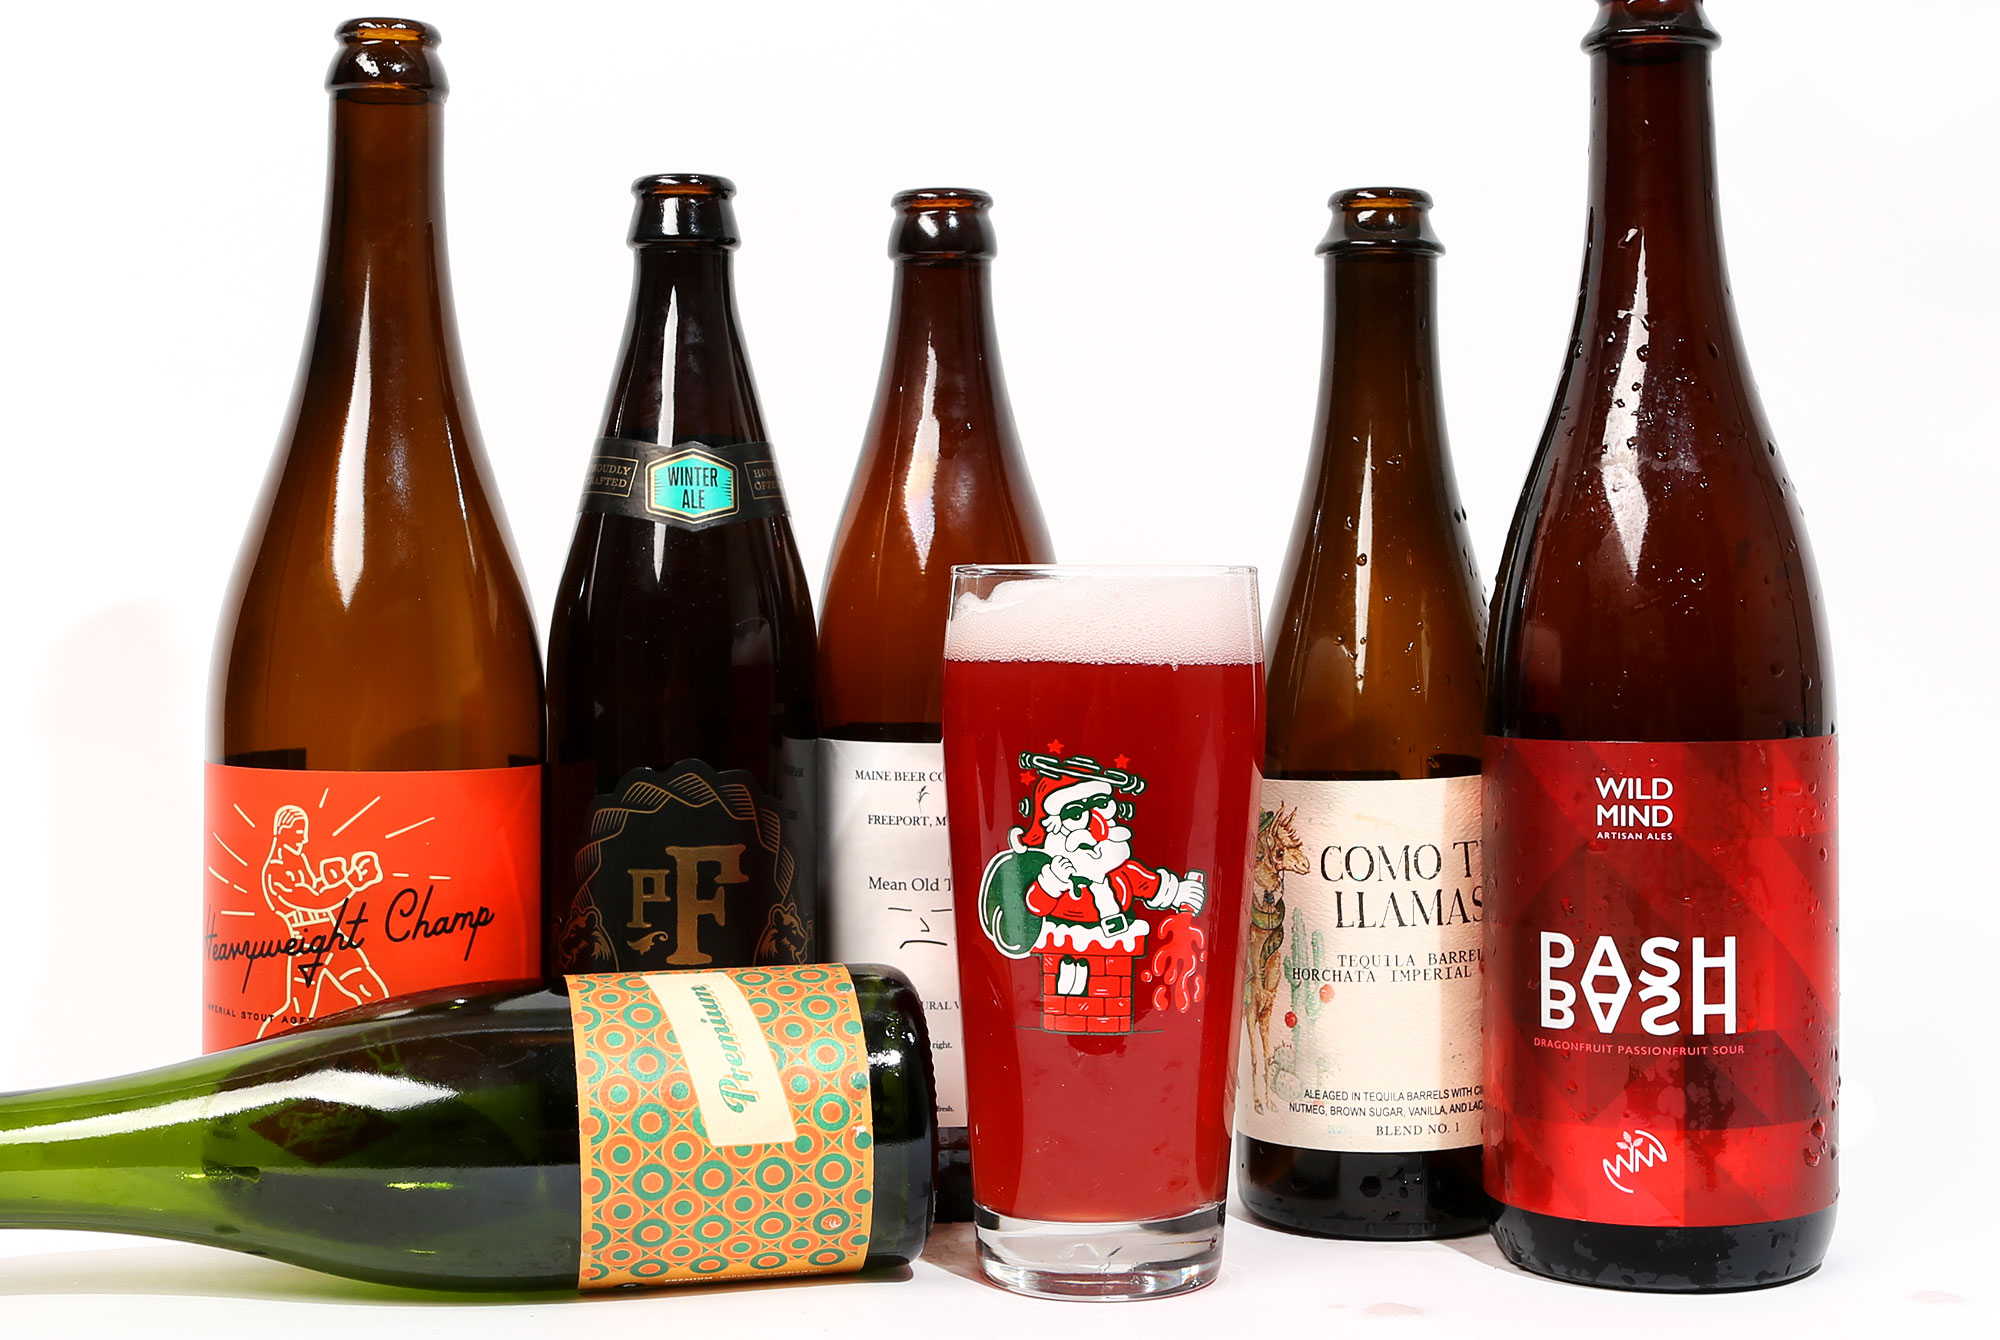 The 15 Best Beers to Drink This Winter